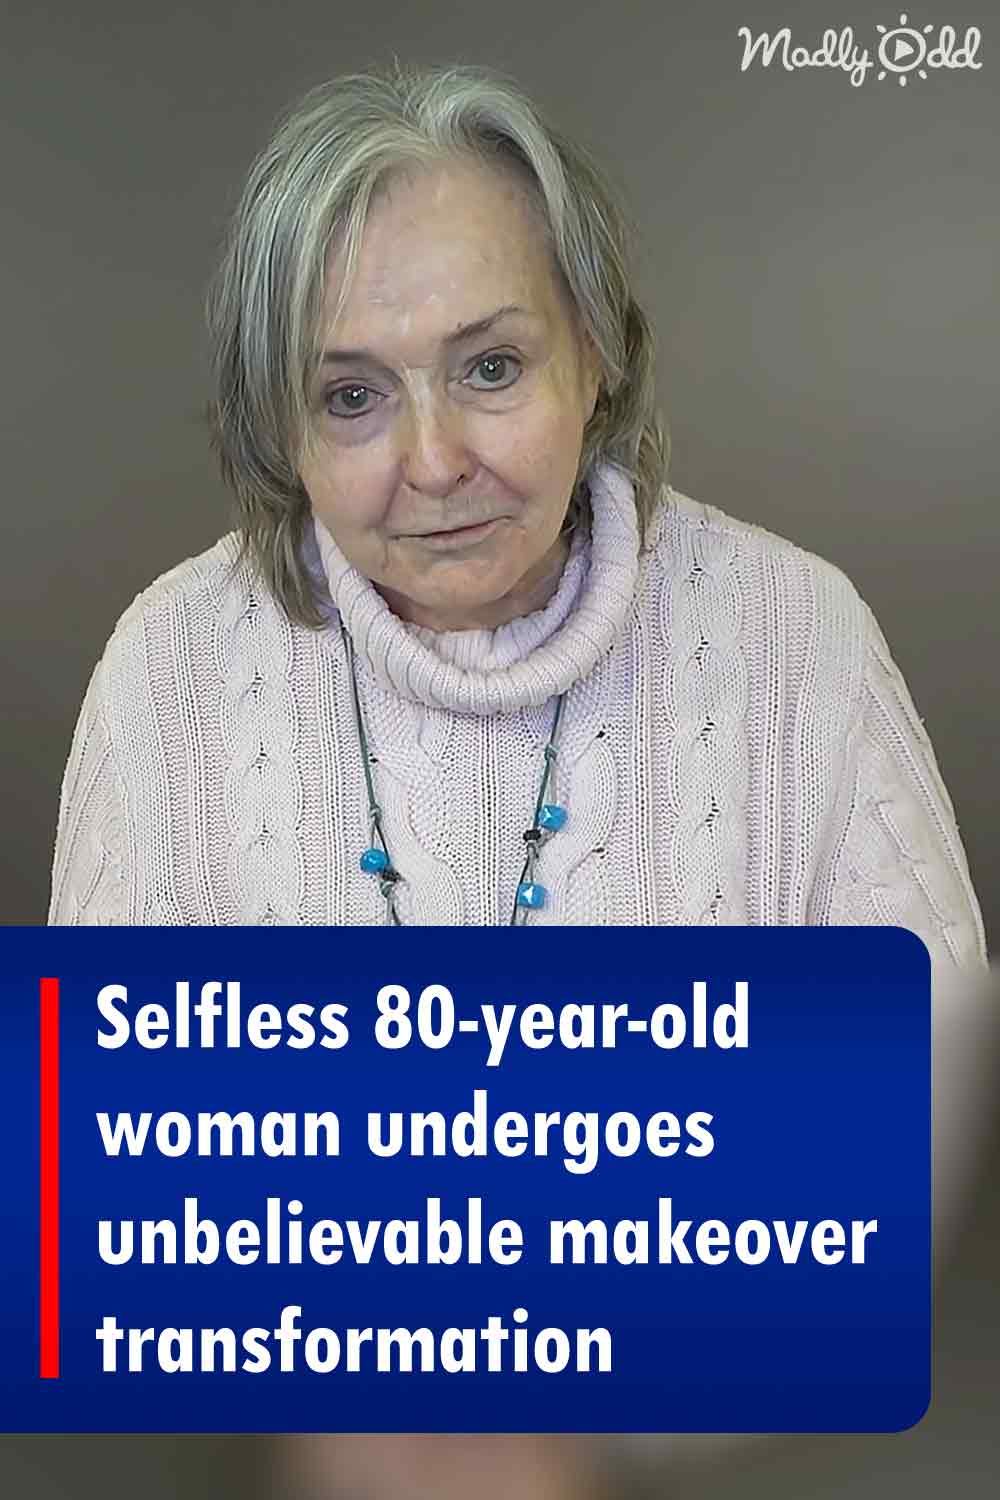 Selfless 80-year-old woman undergoes unbelievable makeover transformation